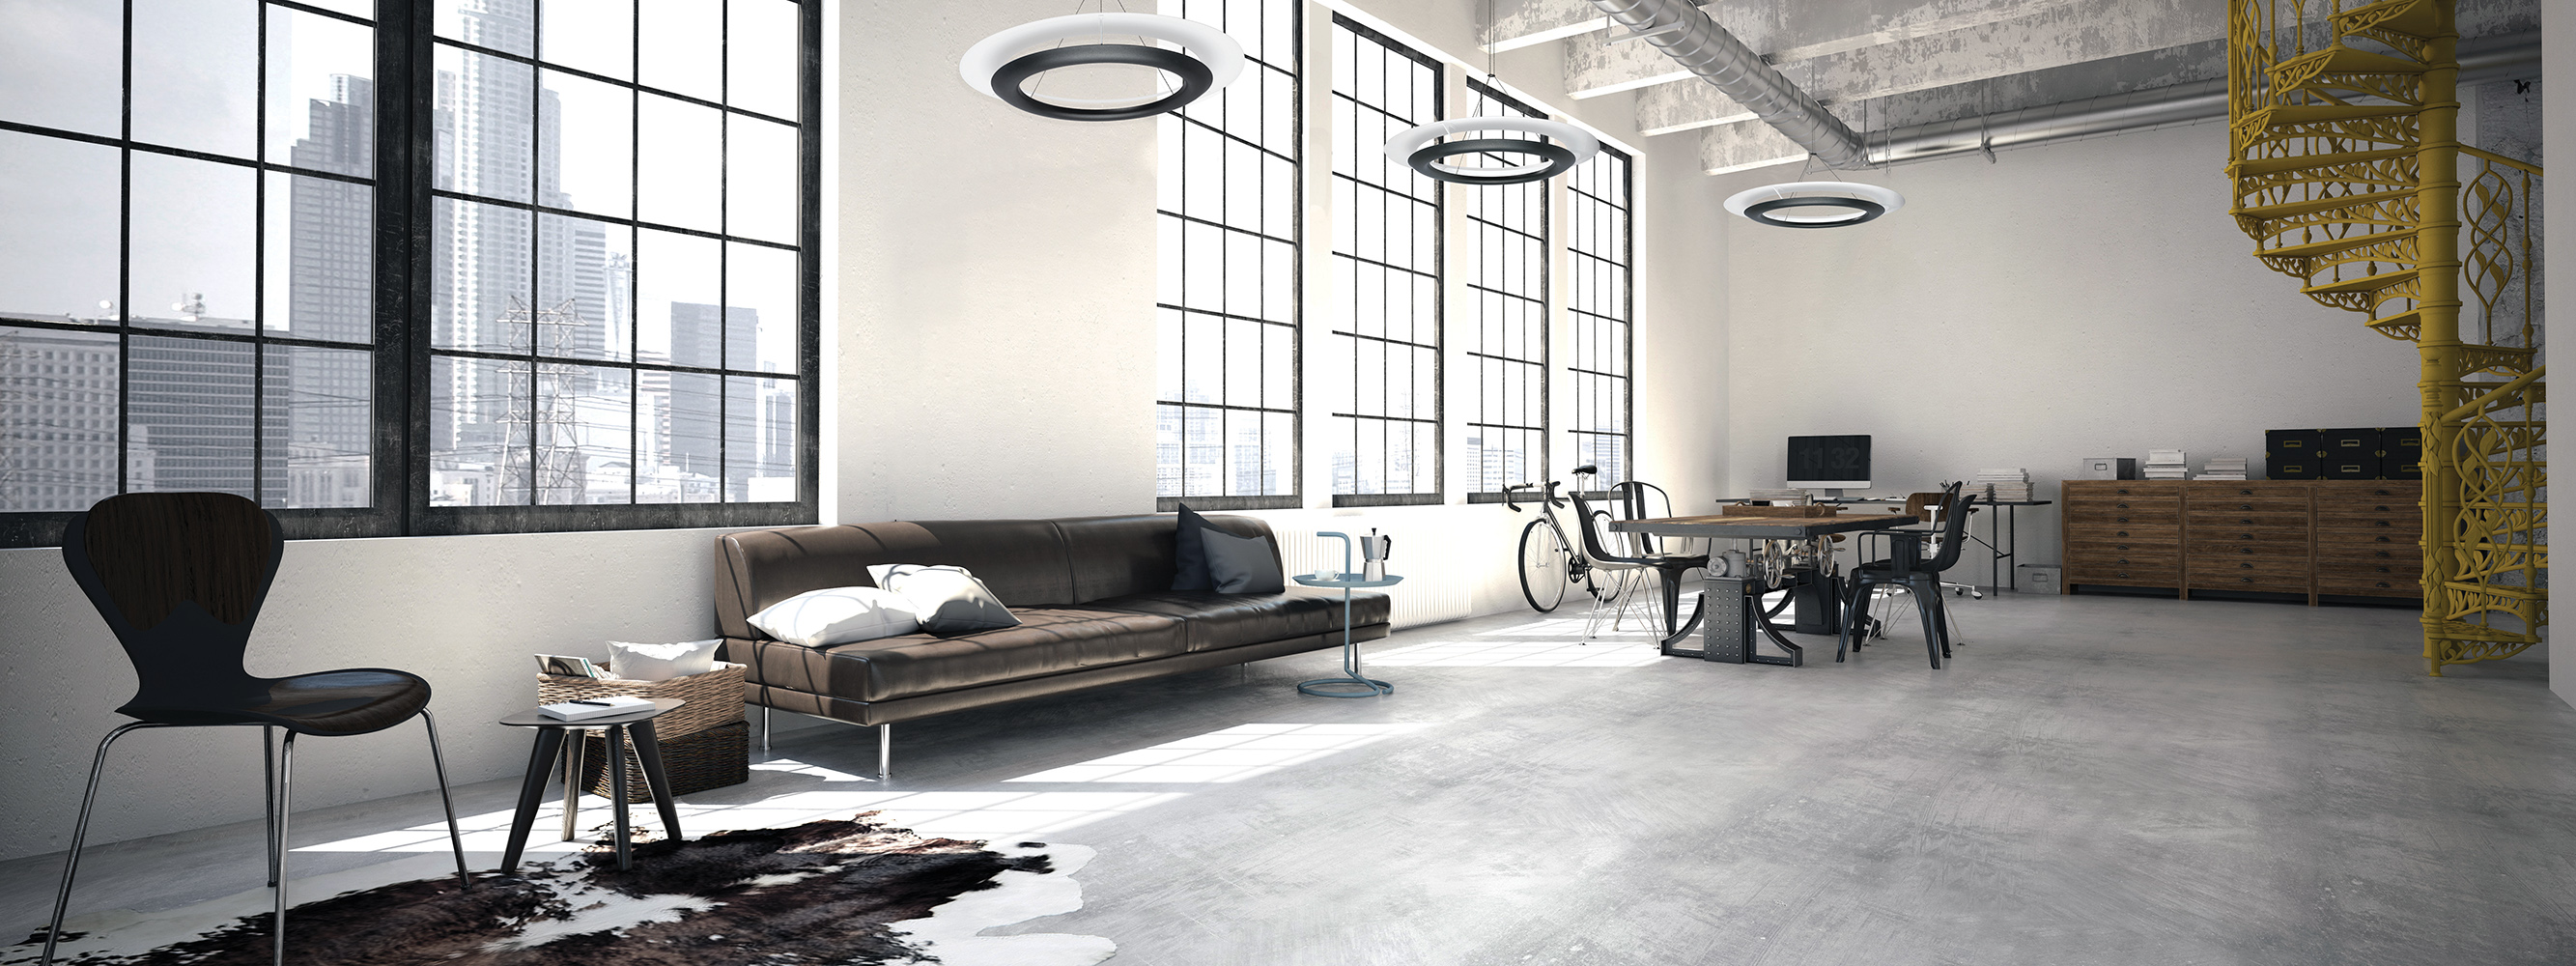 Ultra-modern Cosmo pendants in a sleek apartment lighting design along large windows and a clean loft space